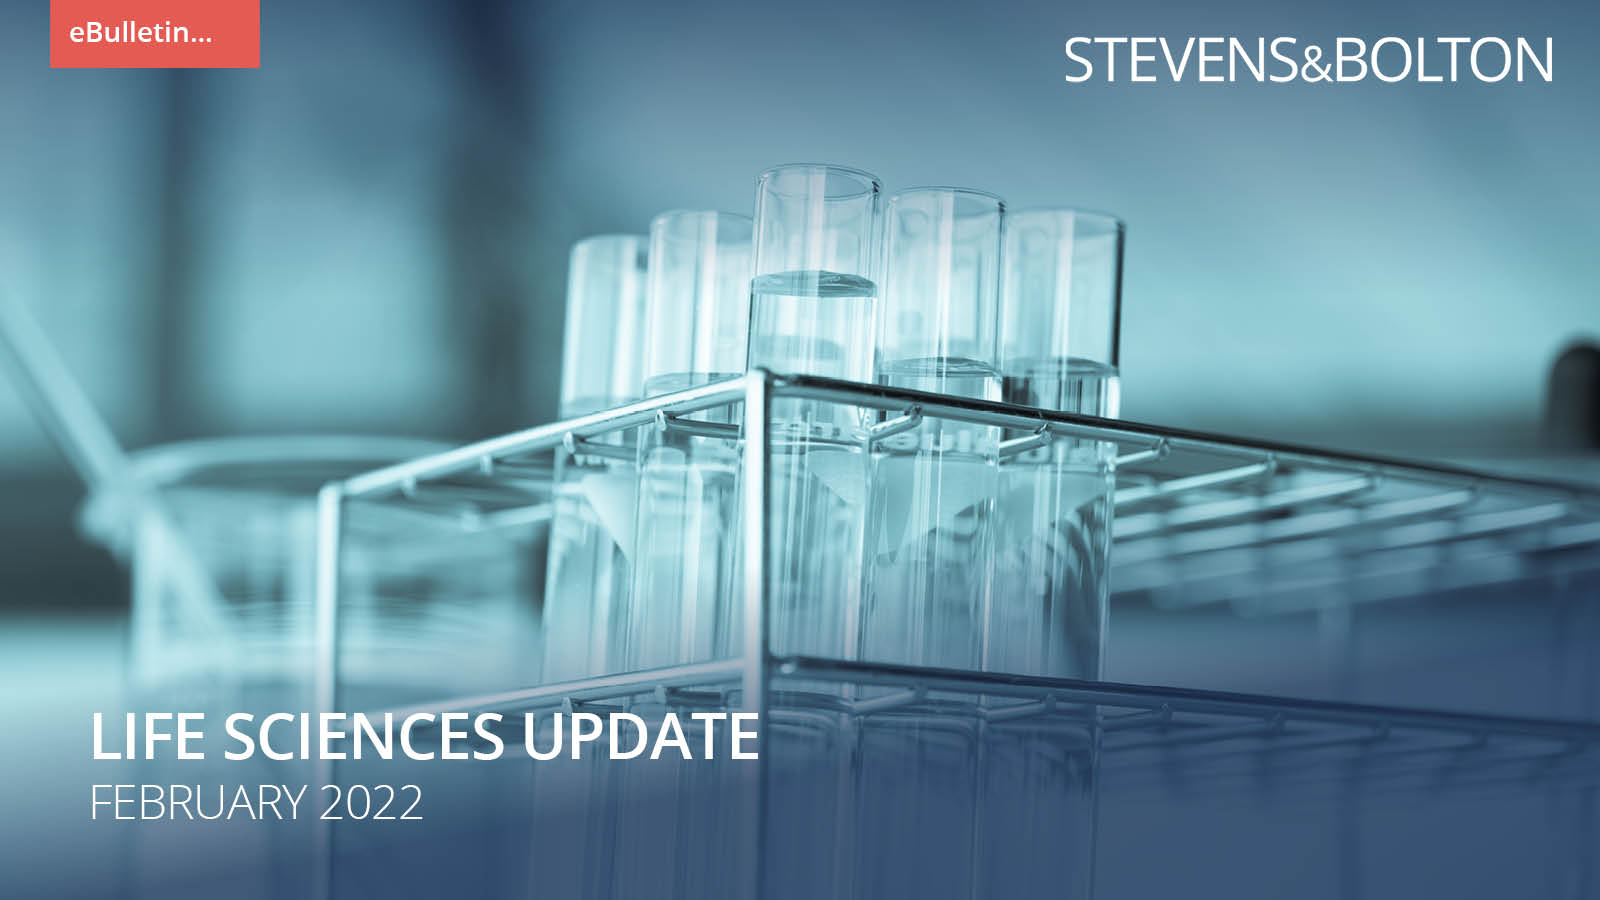 Life Sciences update - February 2022